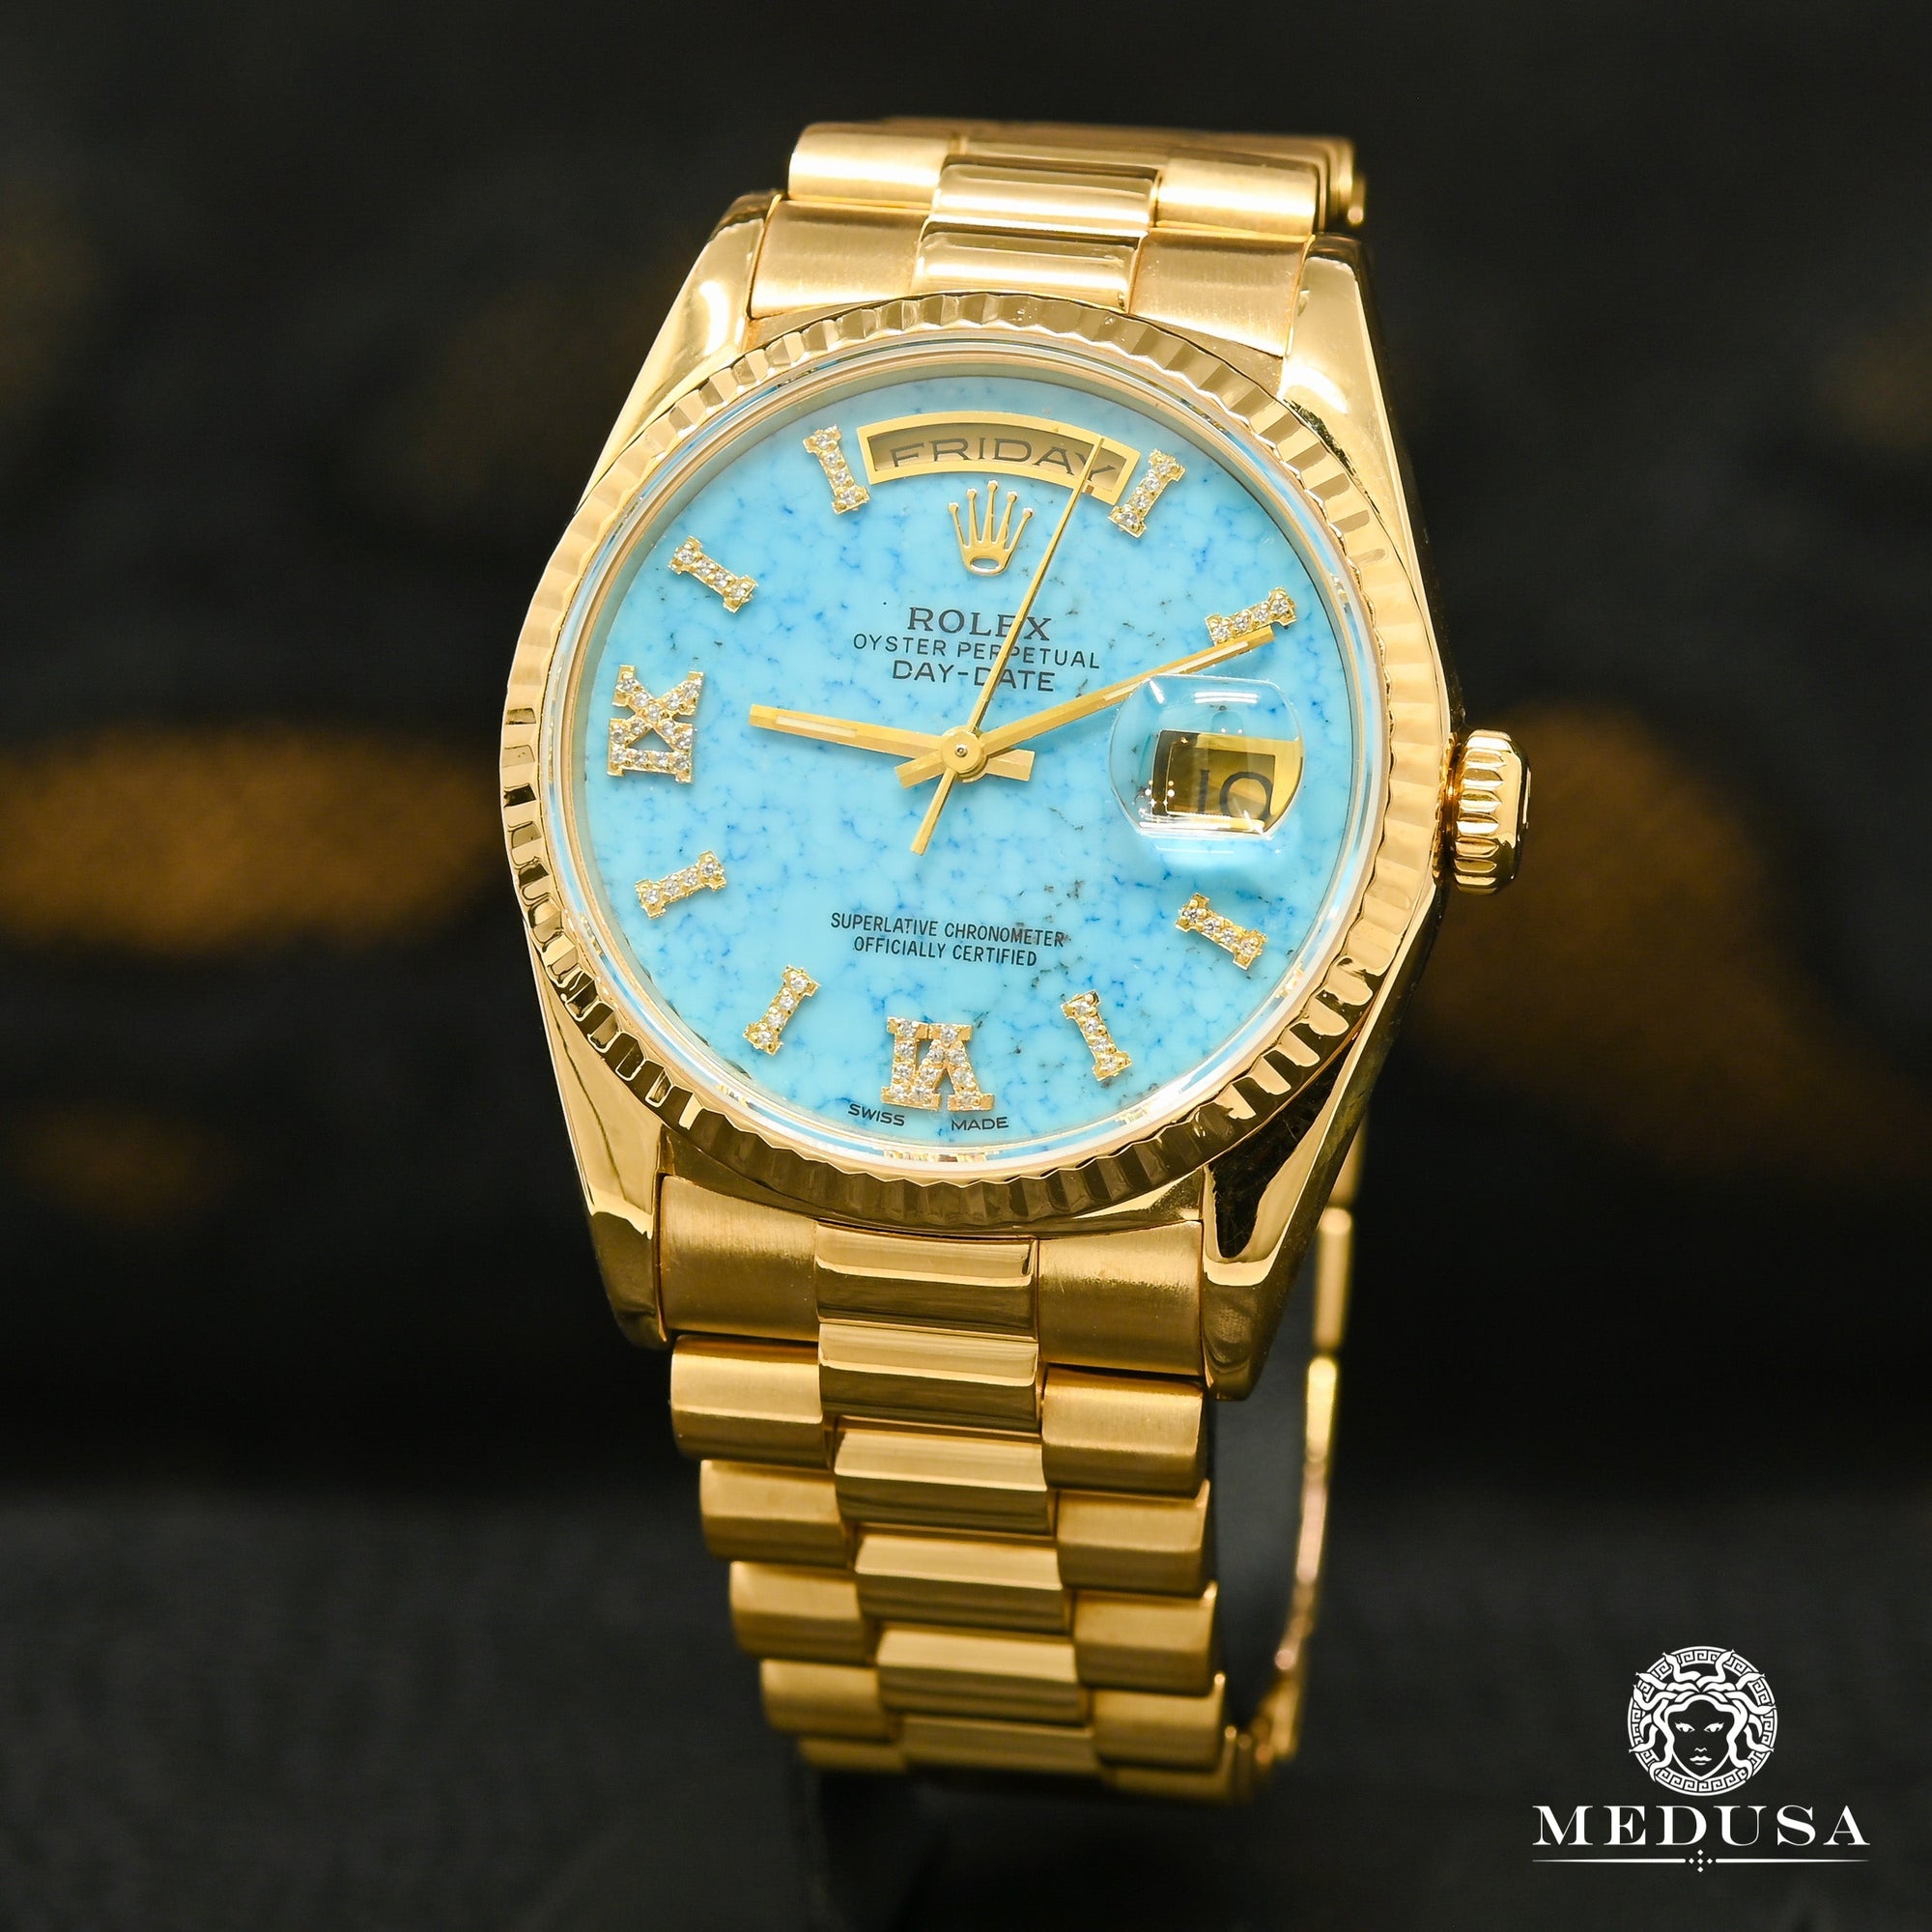 Montre Rolex | Homme President Day-Date 36mm - Turquoise Or Jaune